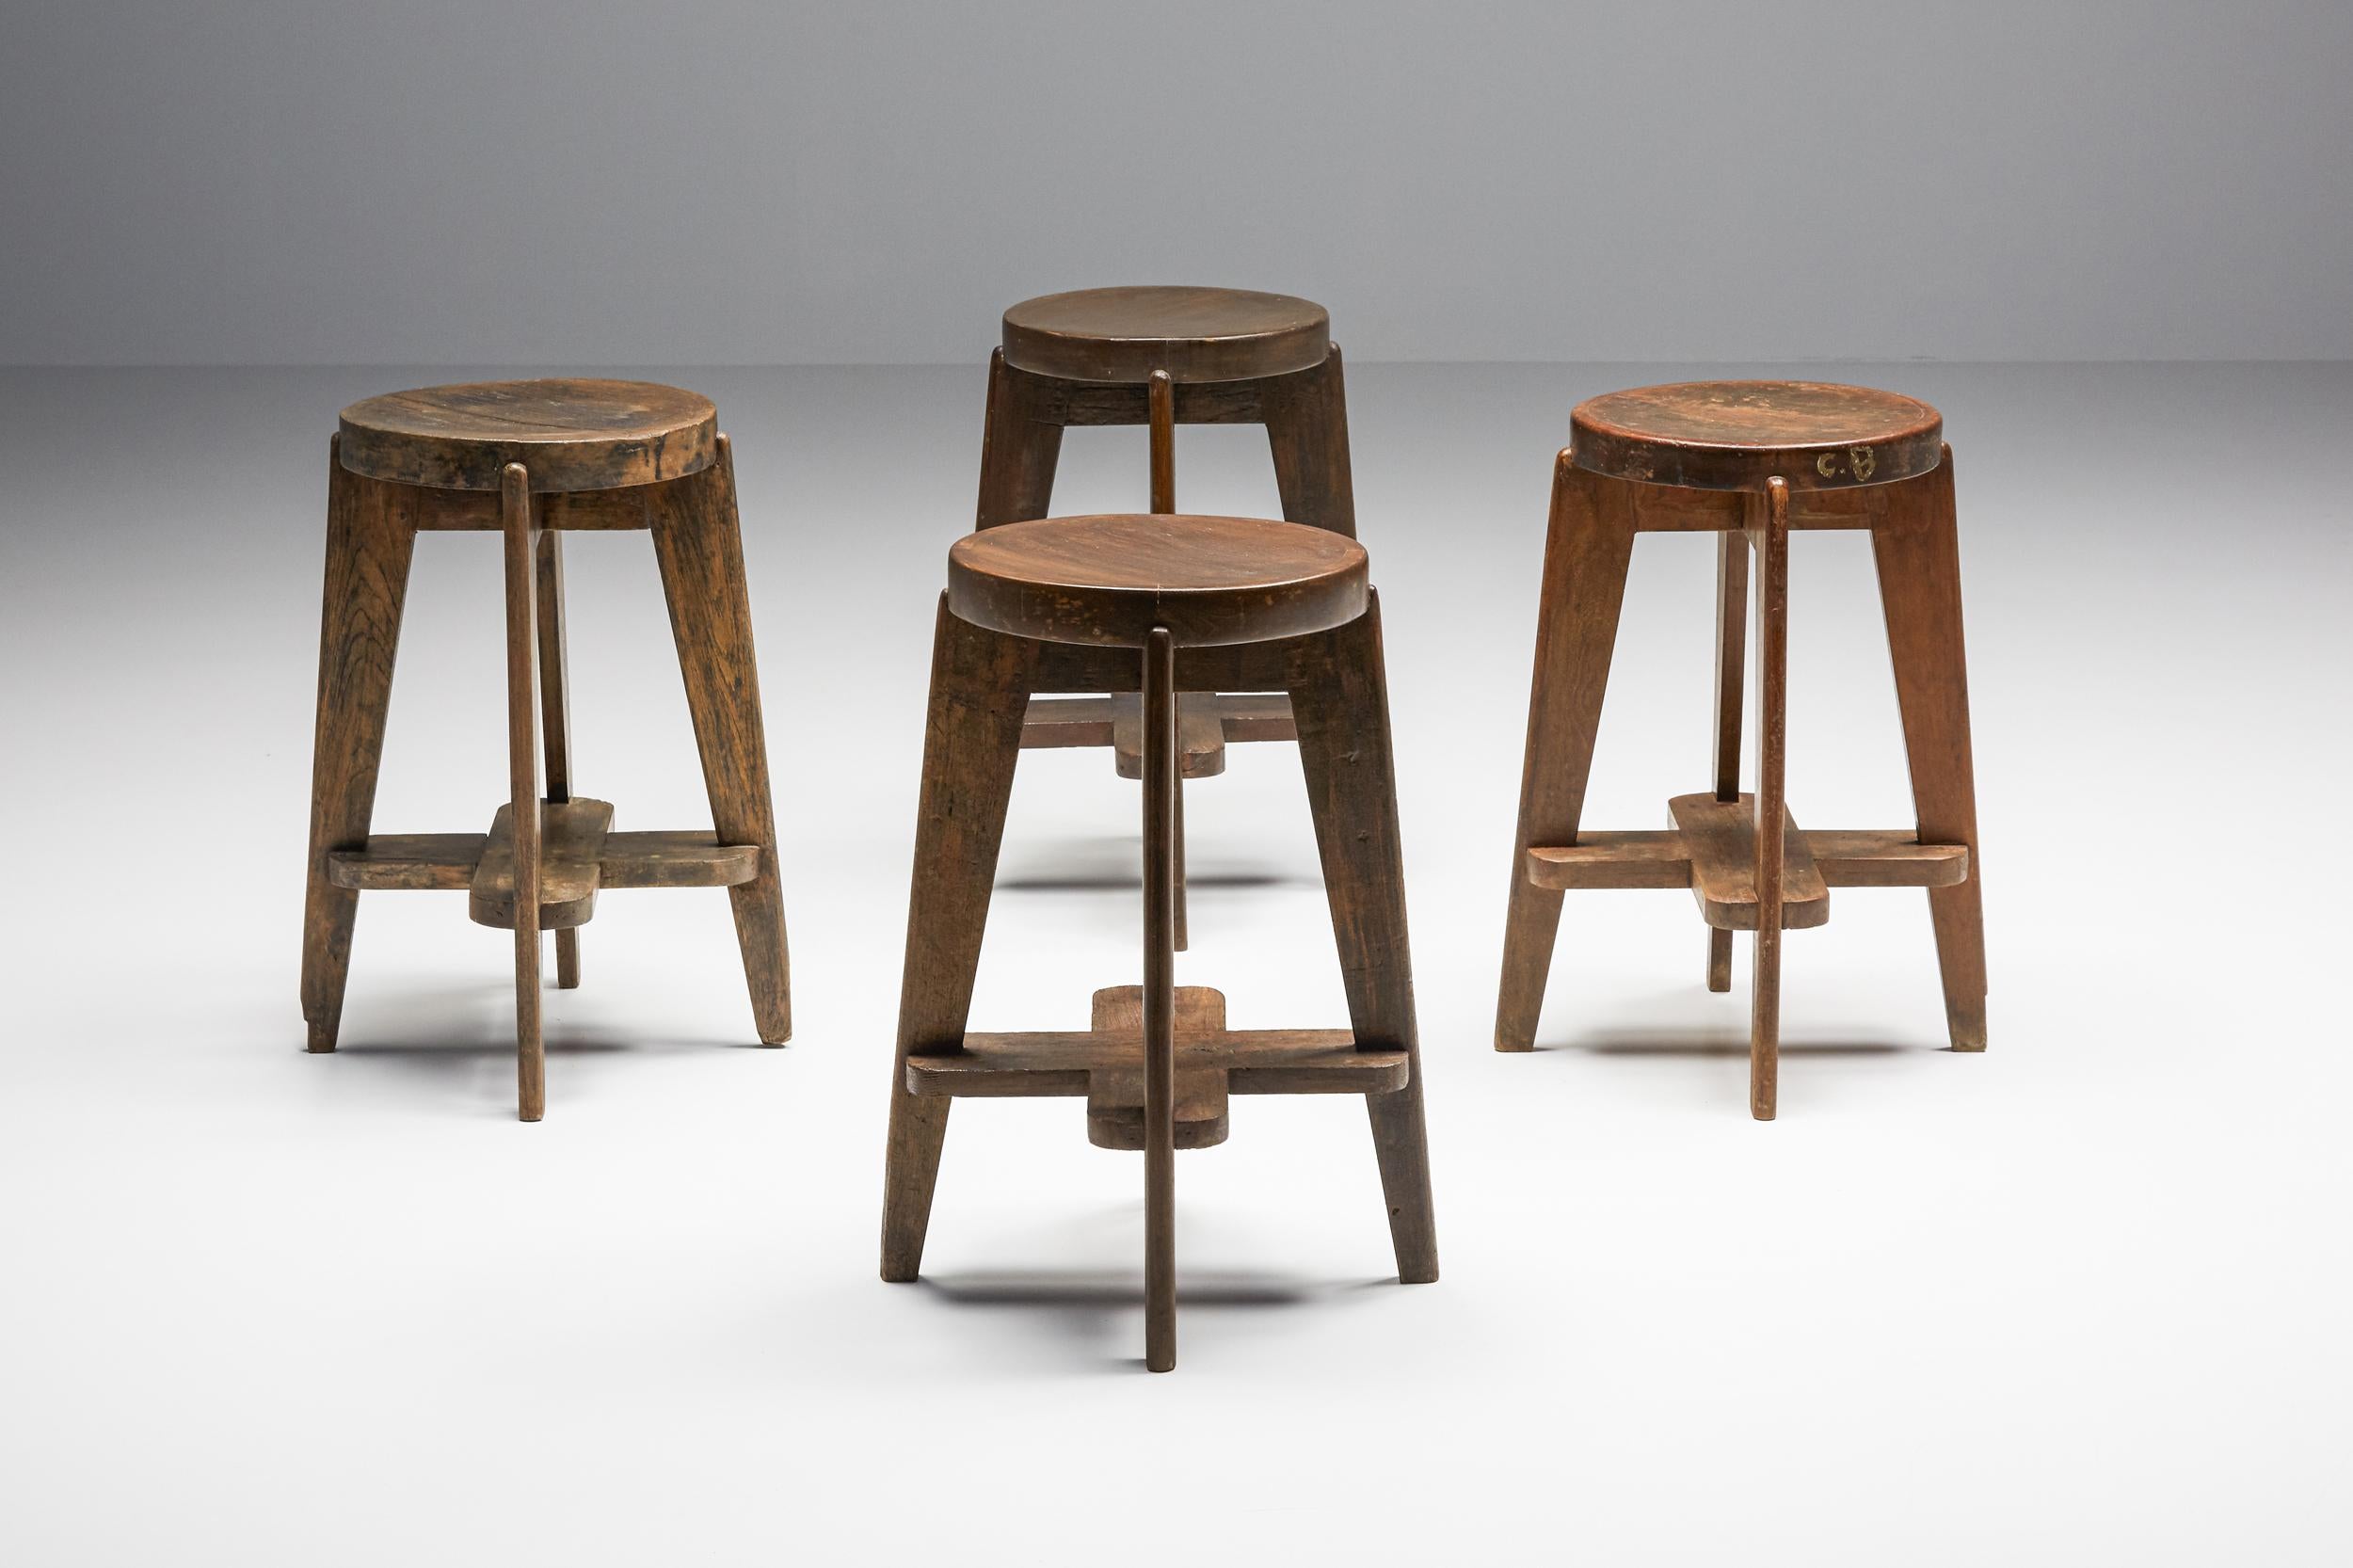 Mid-Century Modern Pierre Jeanneret Chandigarh Stools 'CB', Postmodern influenced by Le Corbusier 